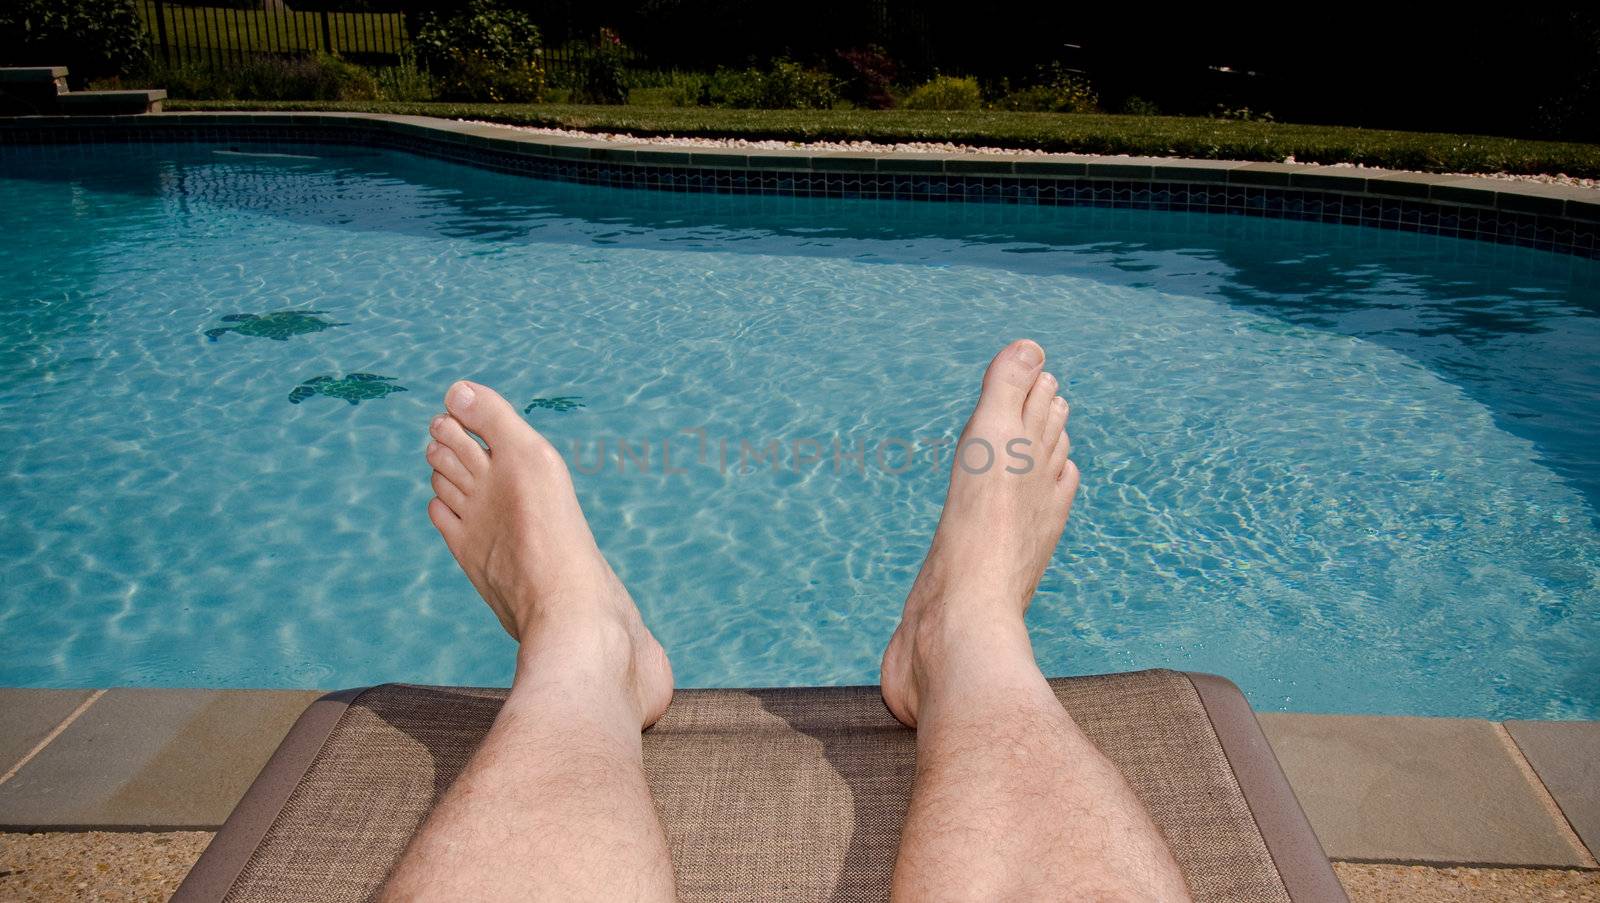 Middle-aged man's feet overhanging blue swimming pool